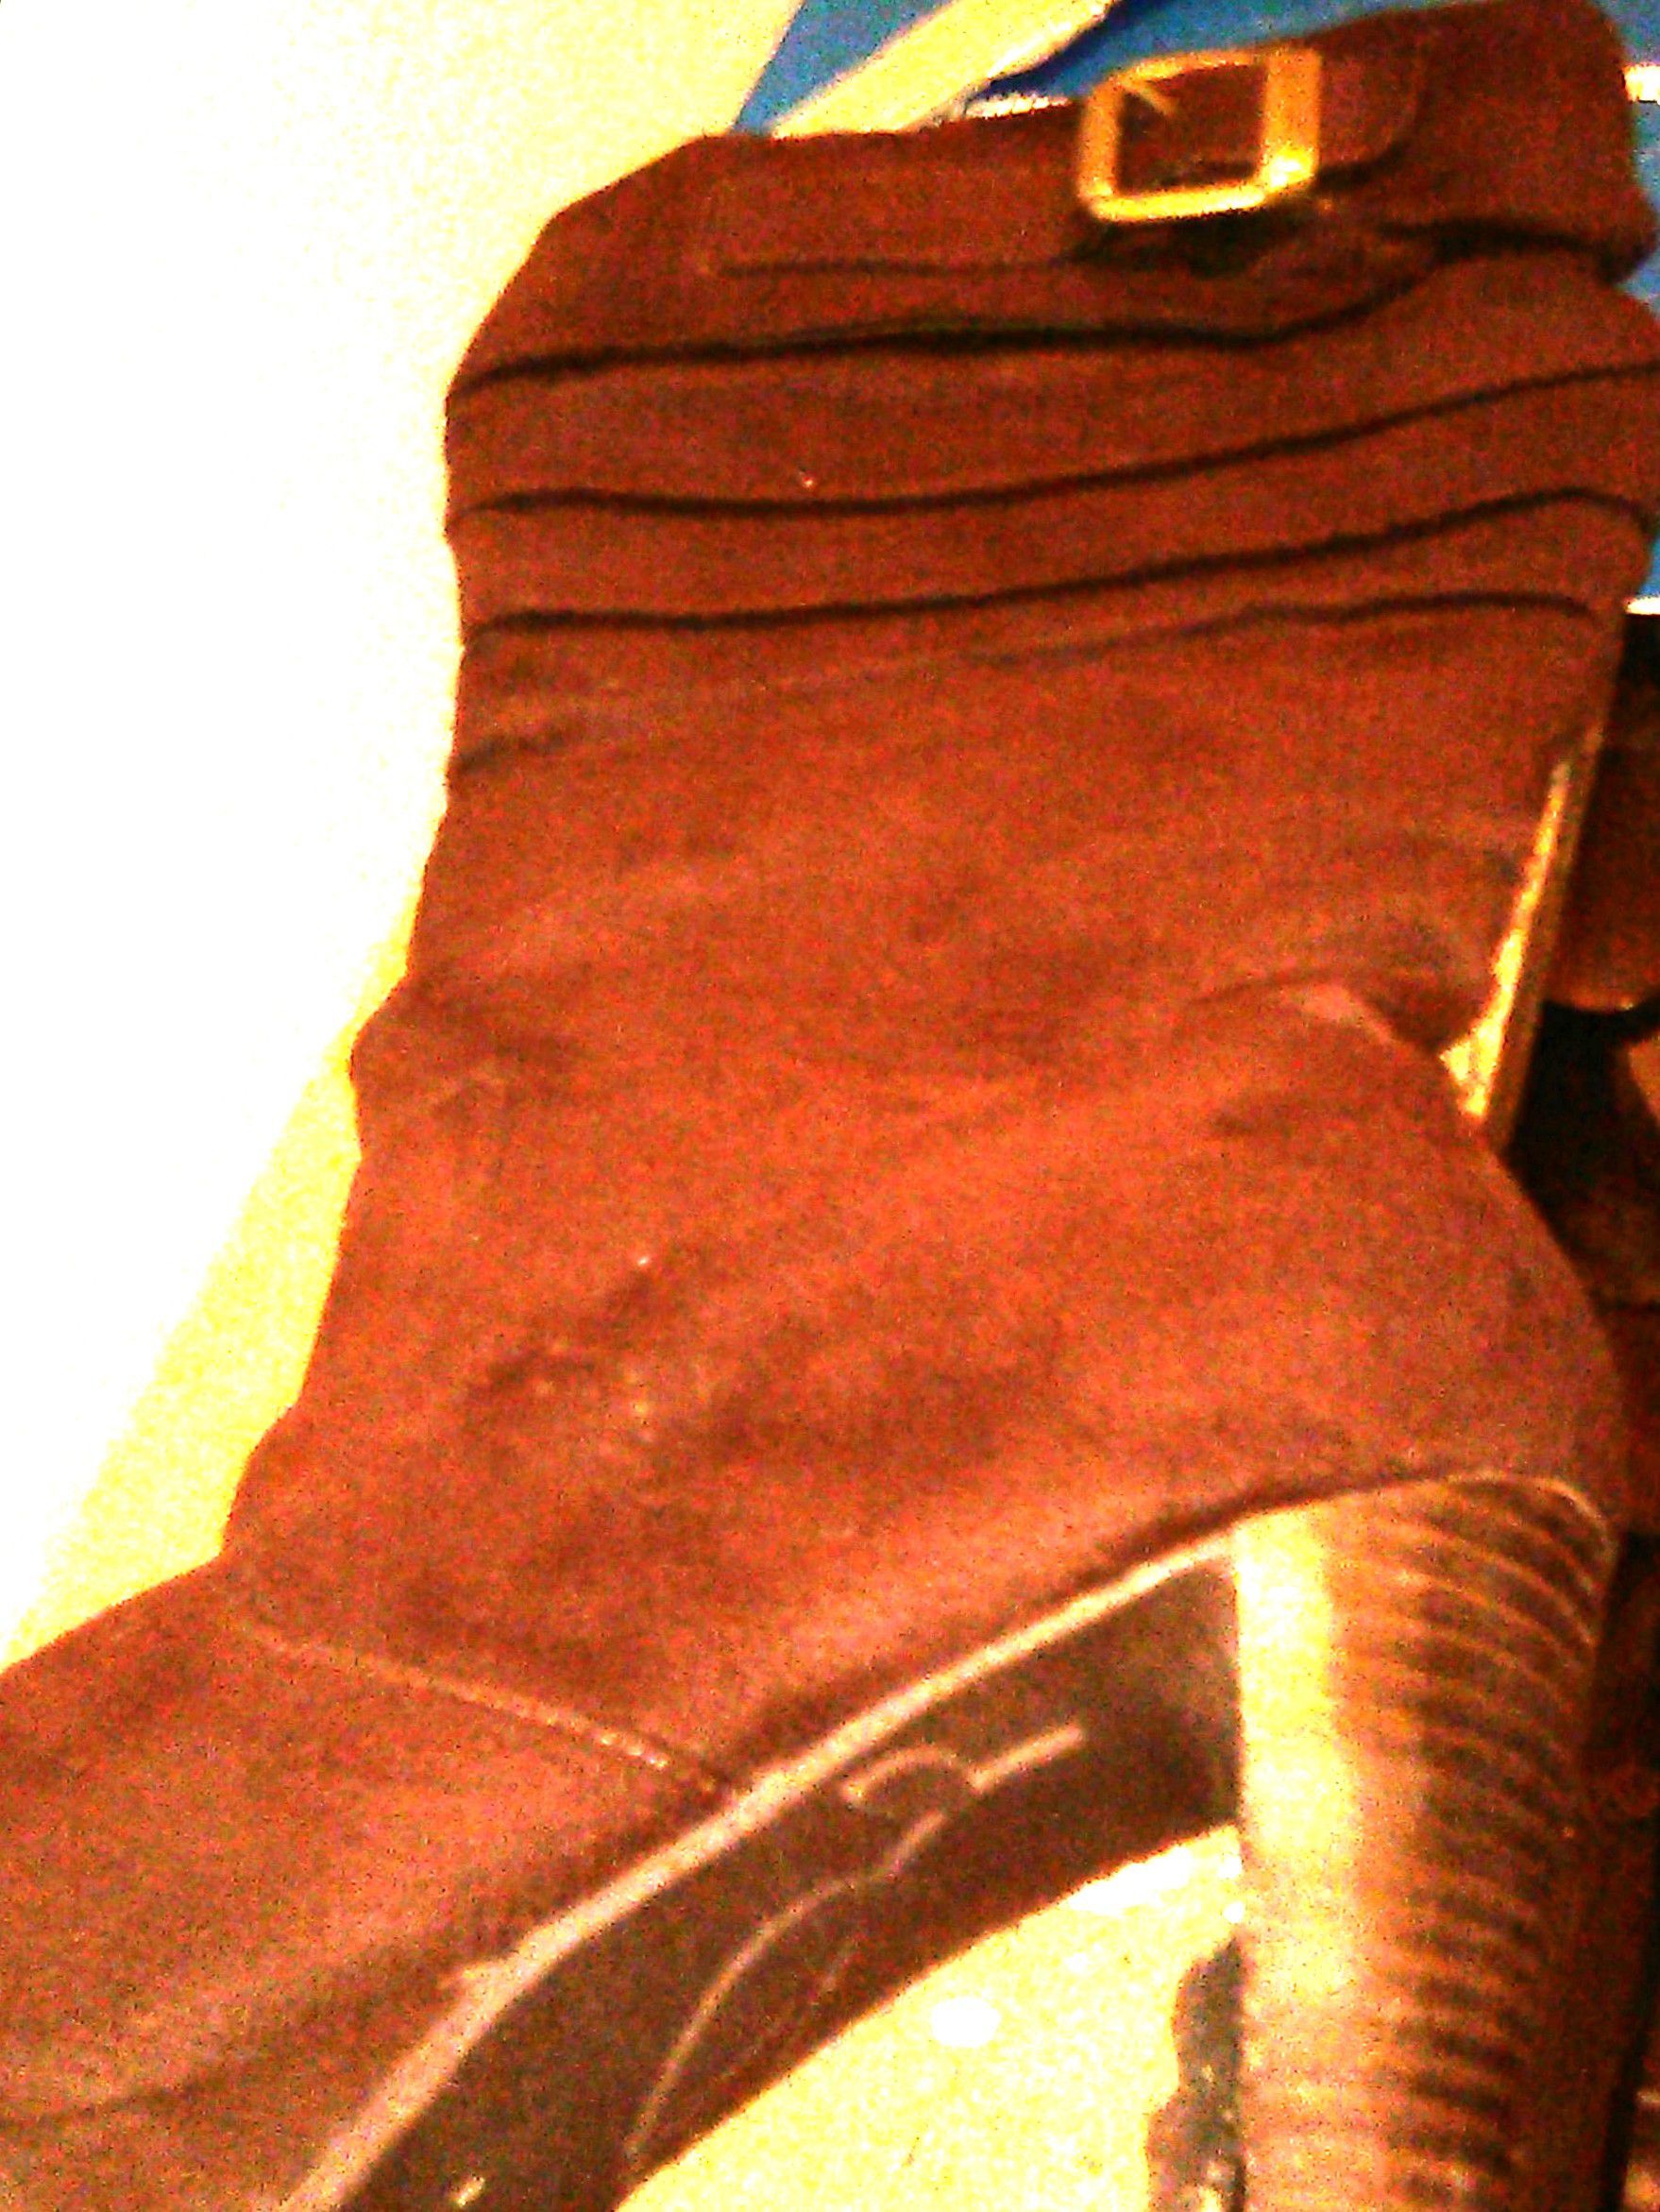 Brand new women's boots size 8 brown suede must click on picture to see the entire boot